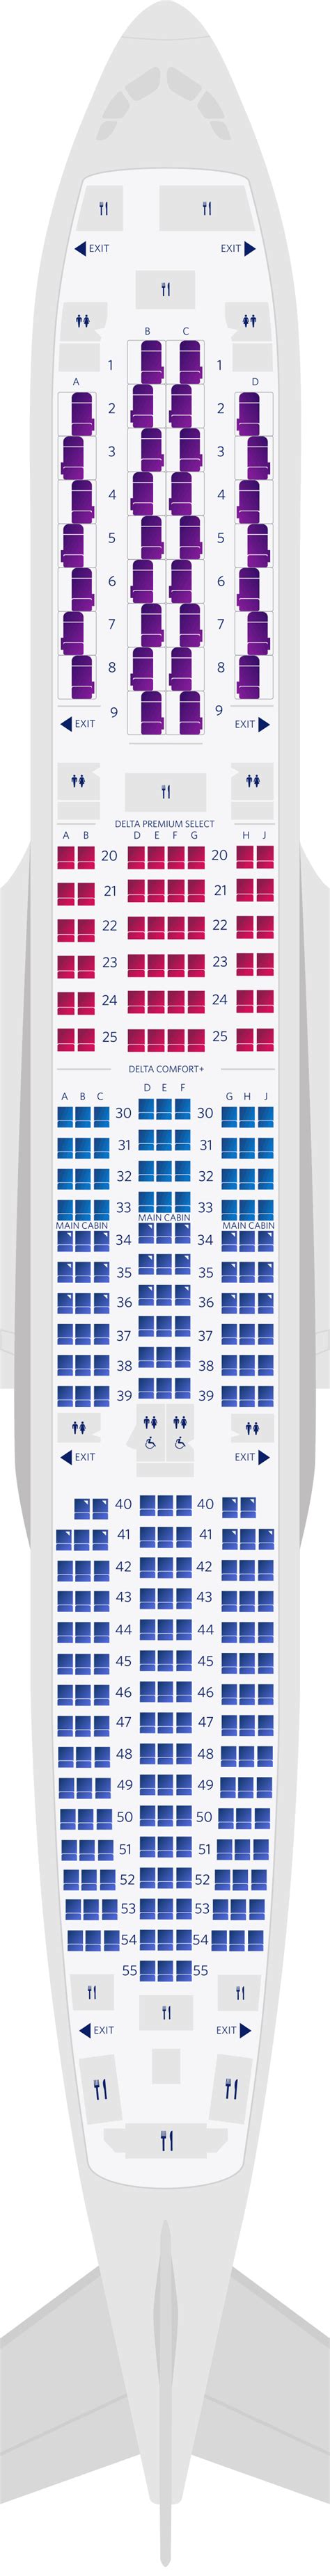 Singapore Airlines Airbus A350 900 Seating Chart Tutor Suhu